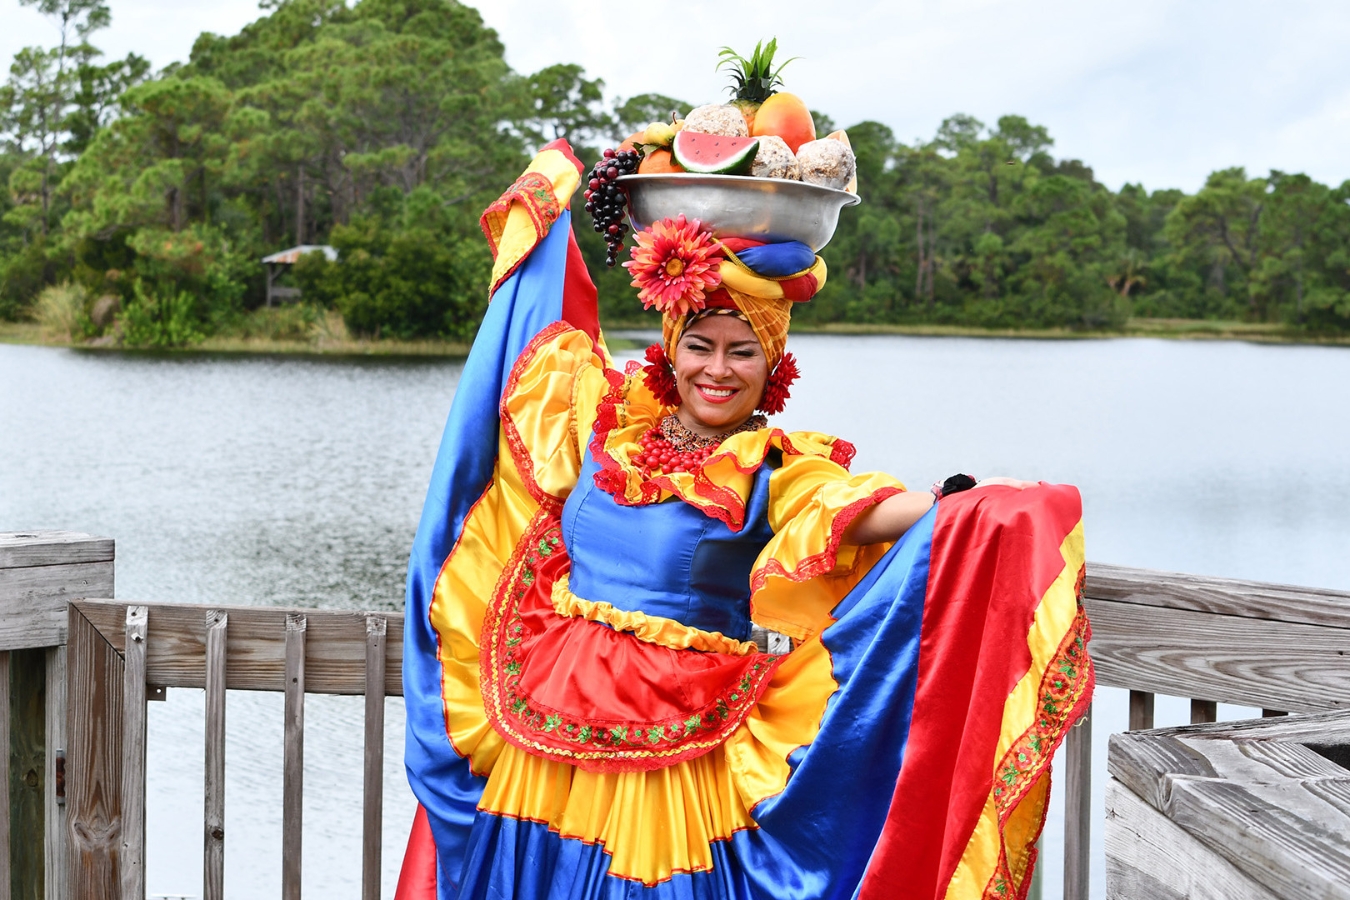 Cultural pride on display: Hispanic dancer donning a traditional dress during a Hispanic Heritage Month event.